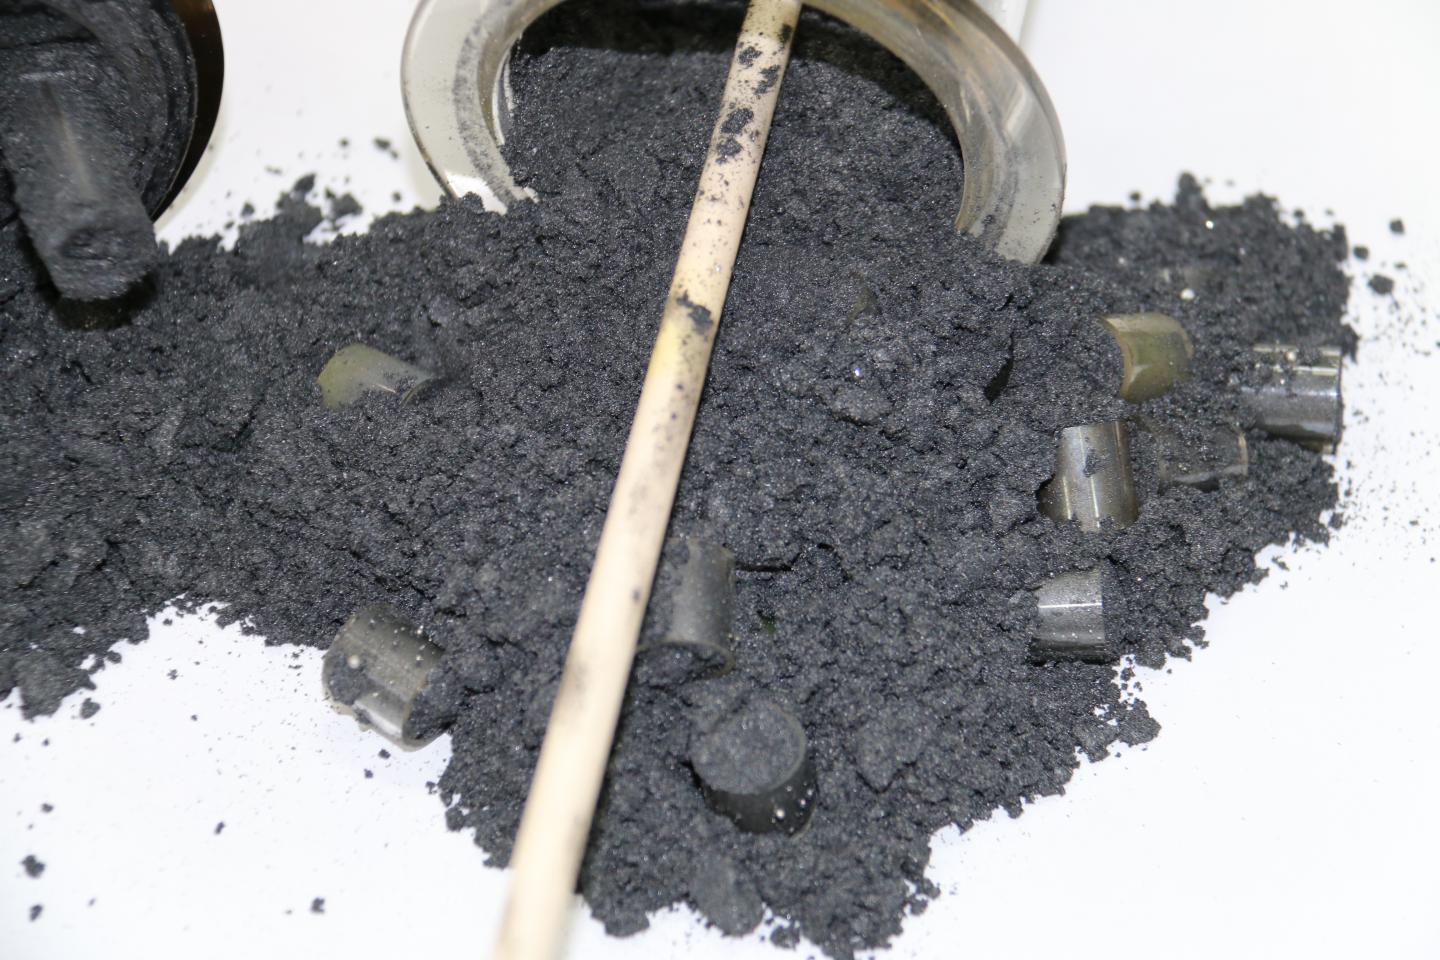 Solid Black Carbon Is A By-Product Of Methane Cracking